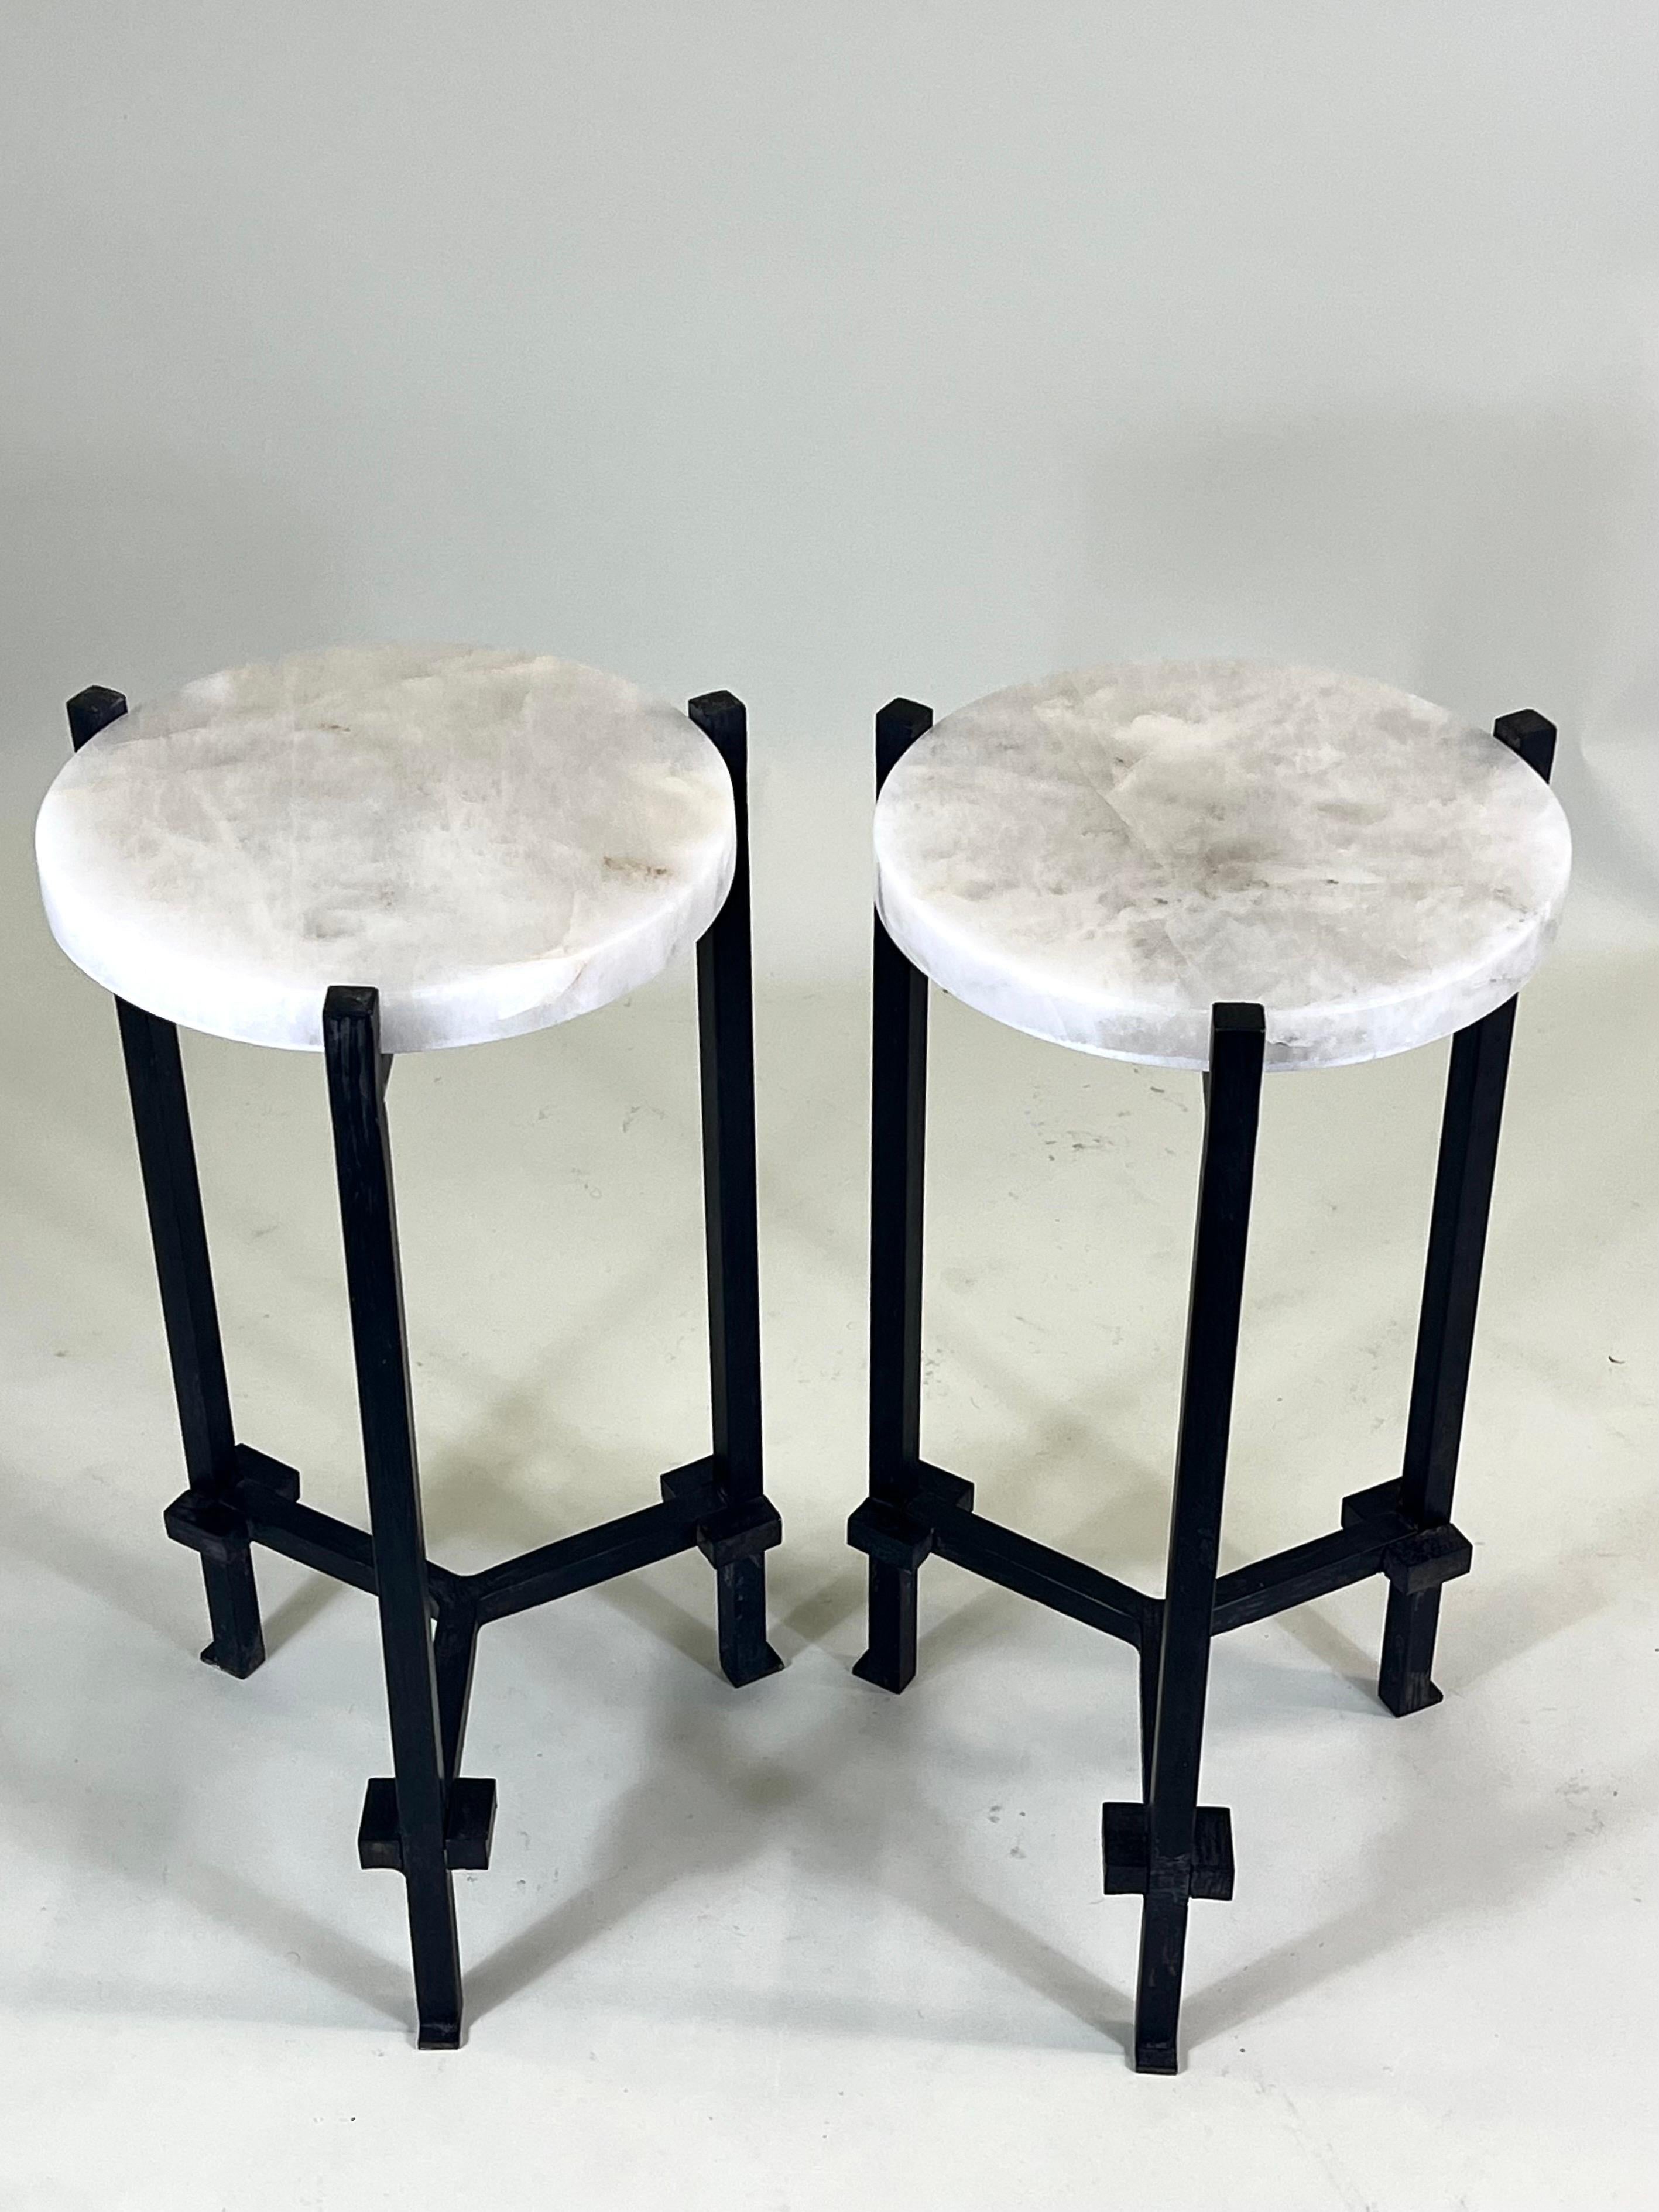 Rare, elegant and timeless Pair of French Mid-Century Modern Neoclassical Side Tables in Hand Wrought Iron and Rock Crystal attributed to Marc du Plantier. The end tables are hand made and composed in a rare and original tripod form. Their